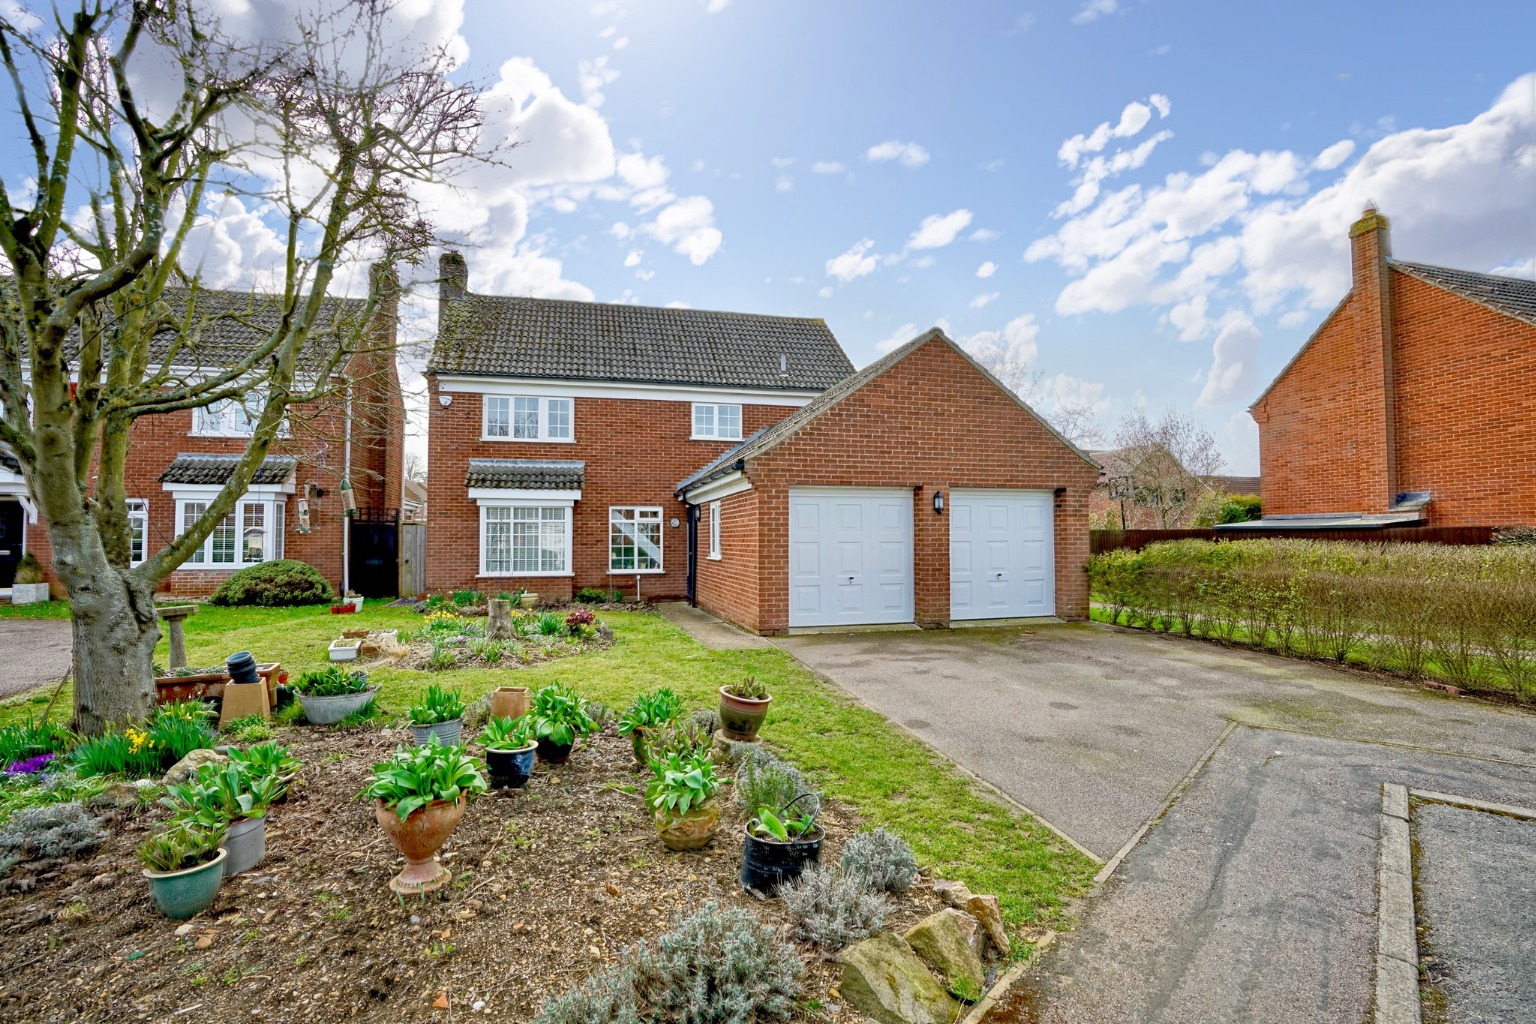 4 bed detached house for sale in Bilberry Close, St. Neots - Property Image 1